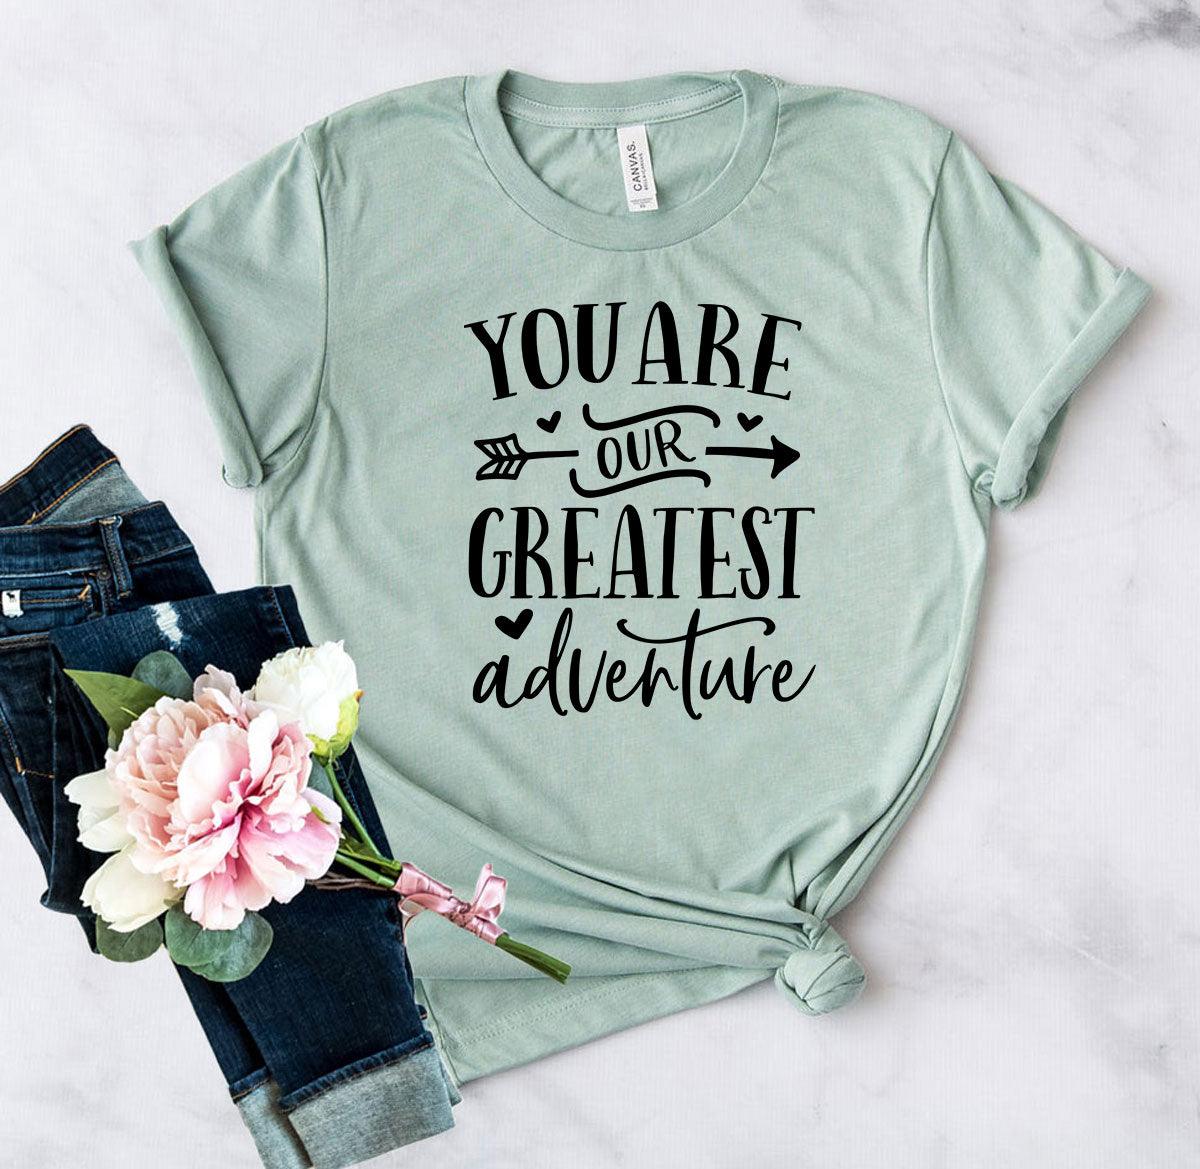 DT0903 You Are Our Greatest Adventure Shirt - VirtuousWares:Global